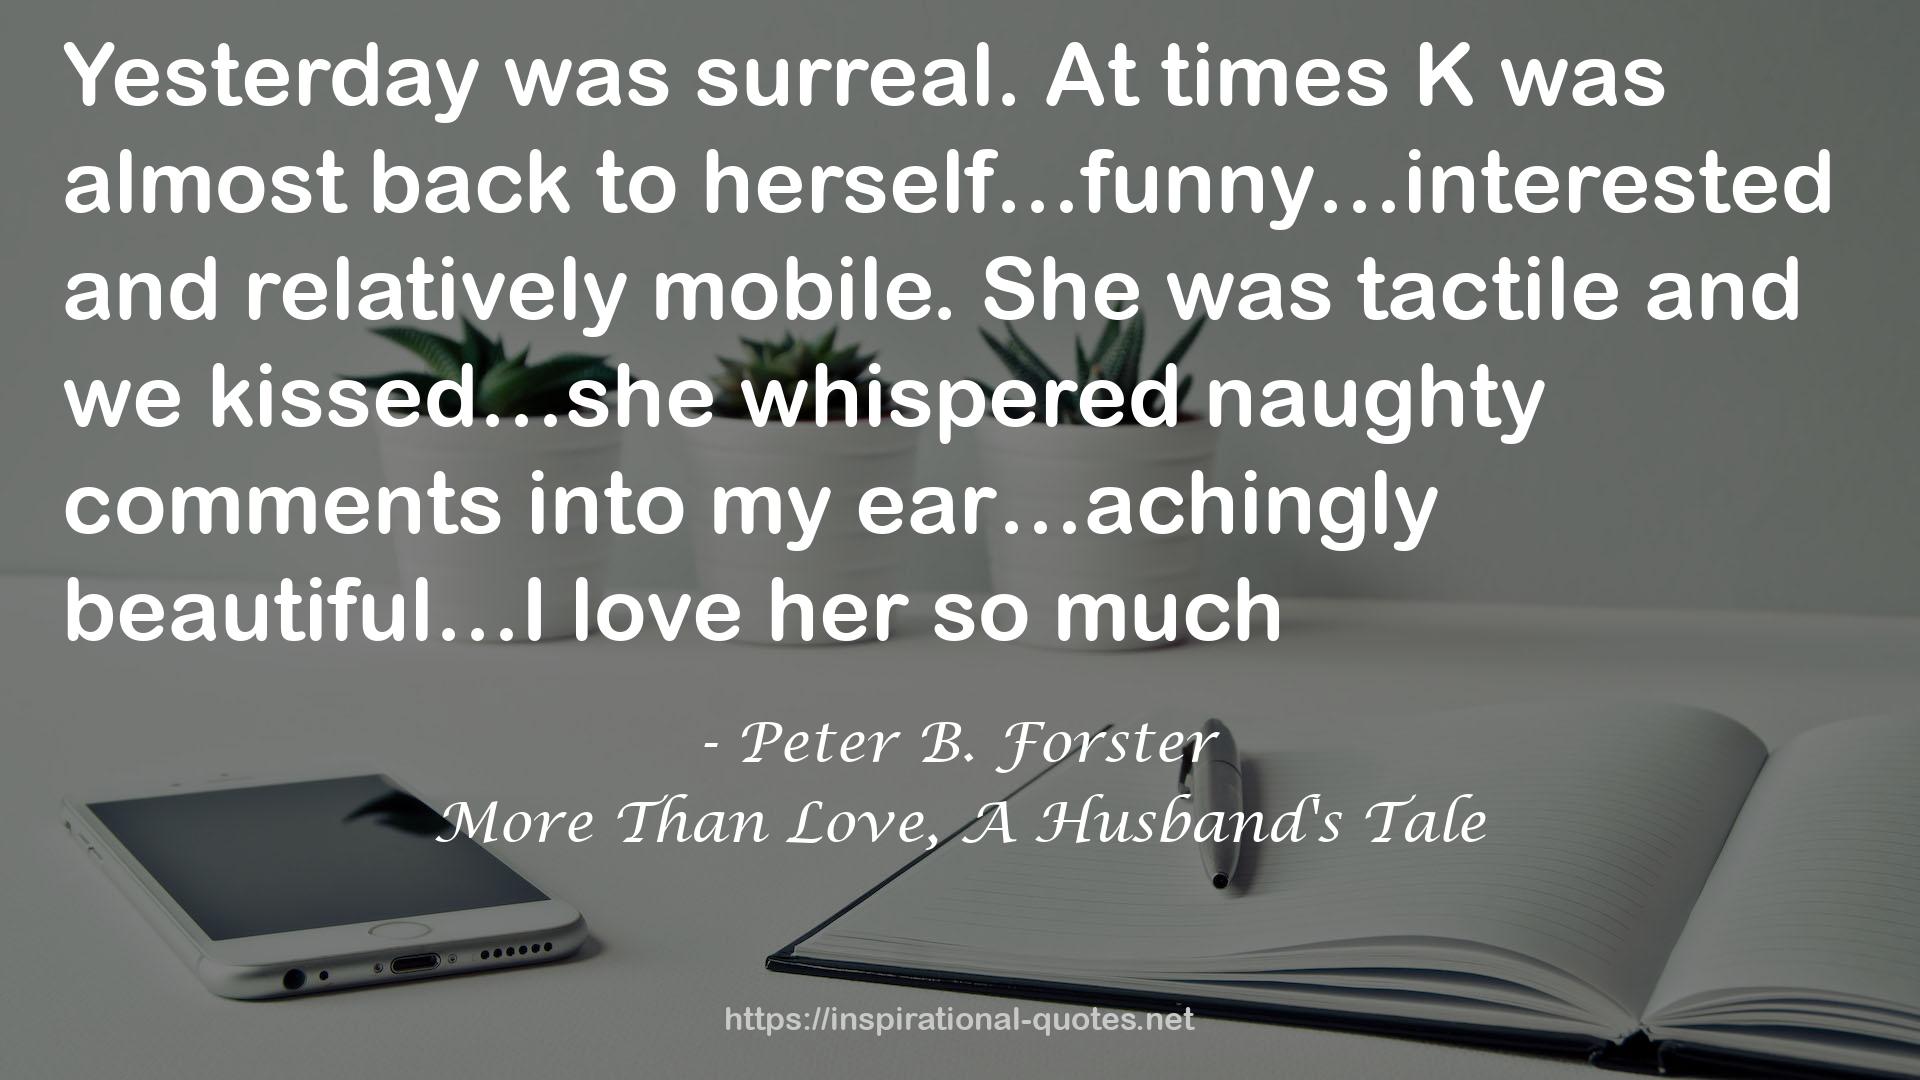 More Than Love, A Husband's Tale QUOTES